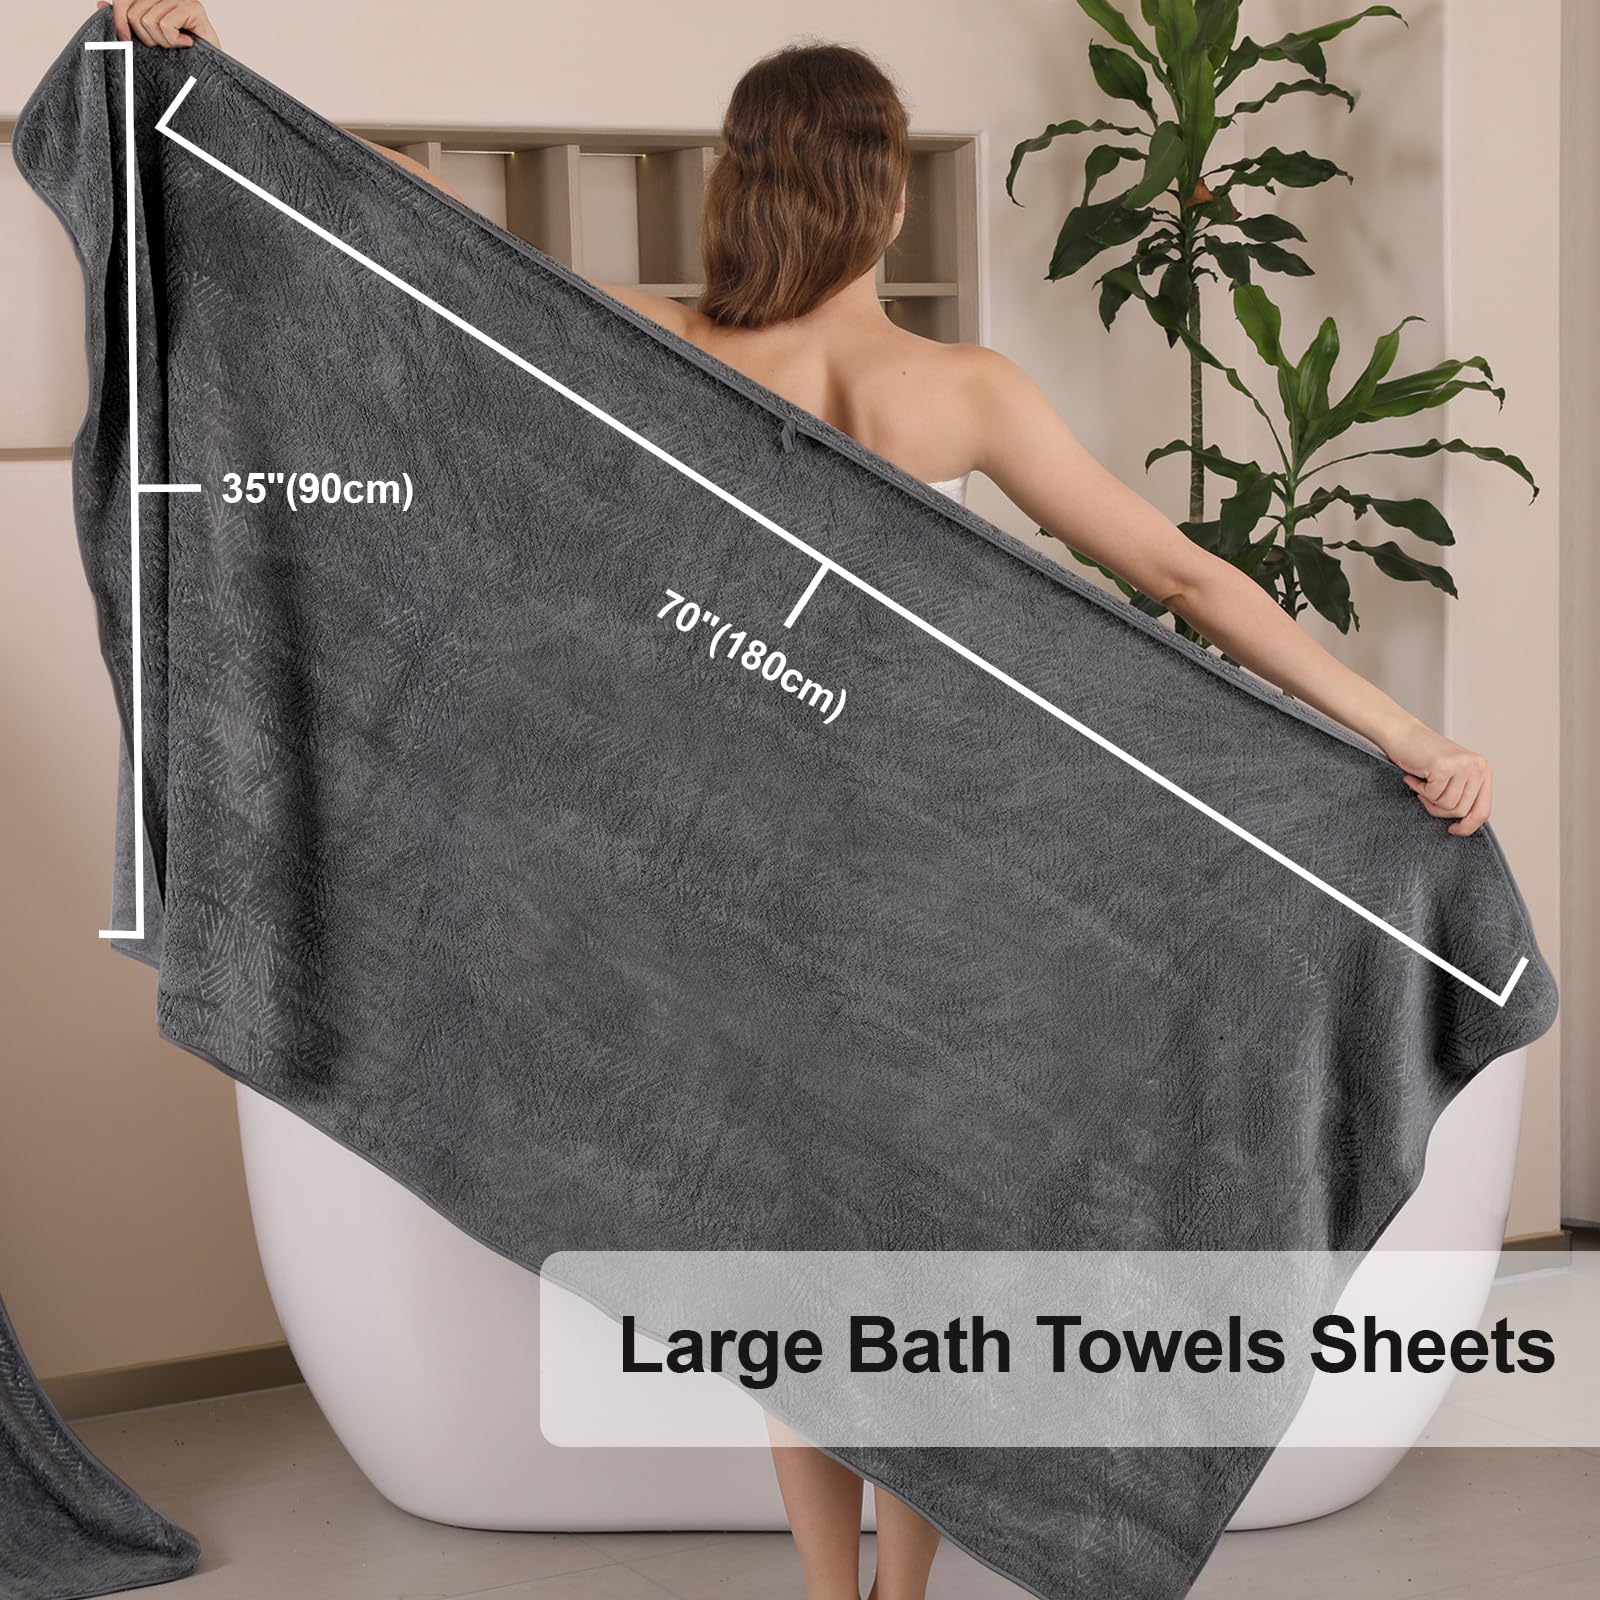 CHINO Bathroom Towel Set, Large Bath Towels Extra Large 35x70 Inch Bath Sheets Towels for Adults, Quick Dry Towel Soft Absorbent Oversized Towels Microfiber Shower Towels Hotel Spa (4 Pcs Dark Grey)